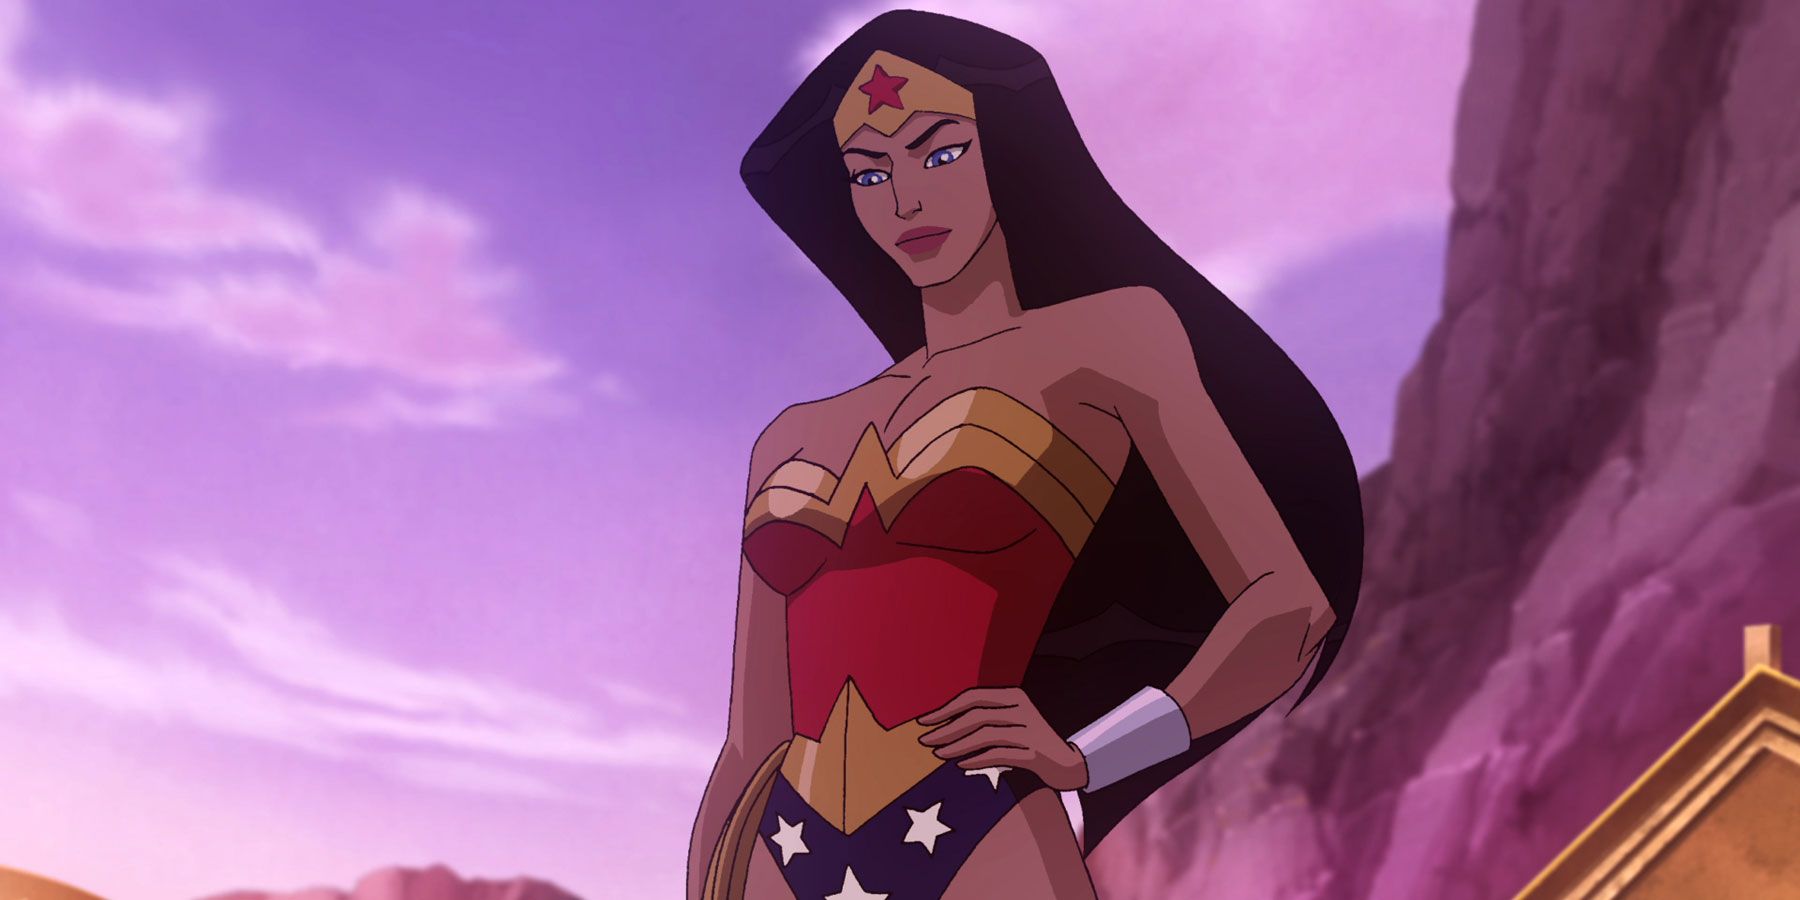 Wonder Woman from a DC animated movie.